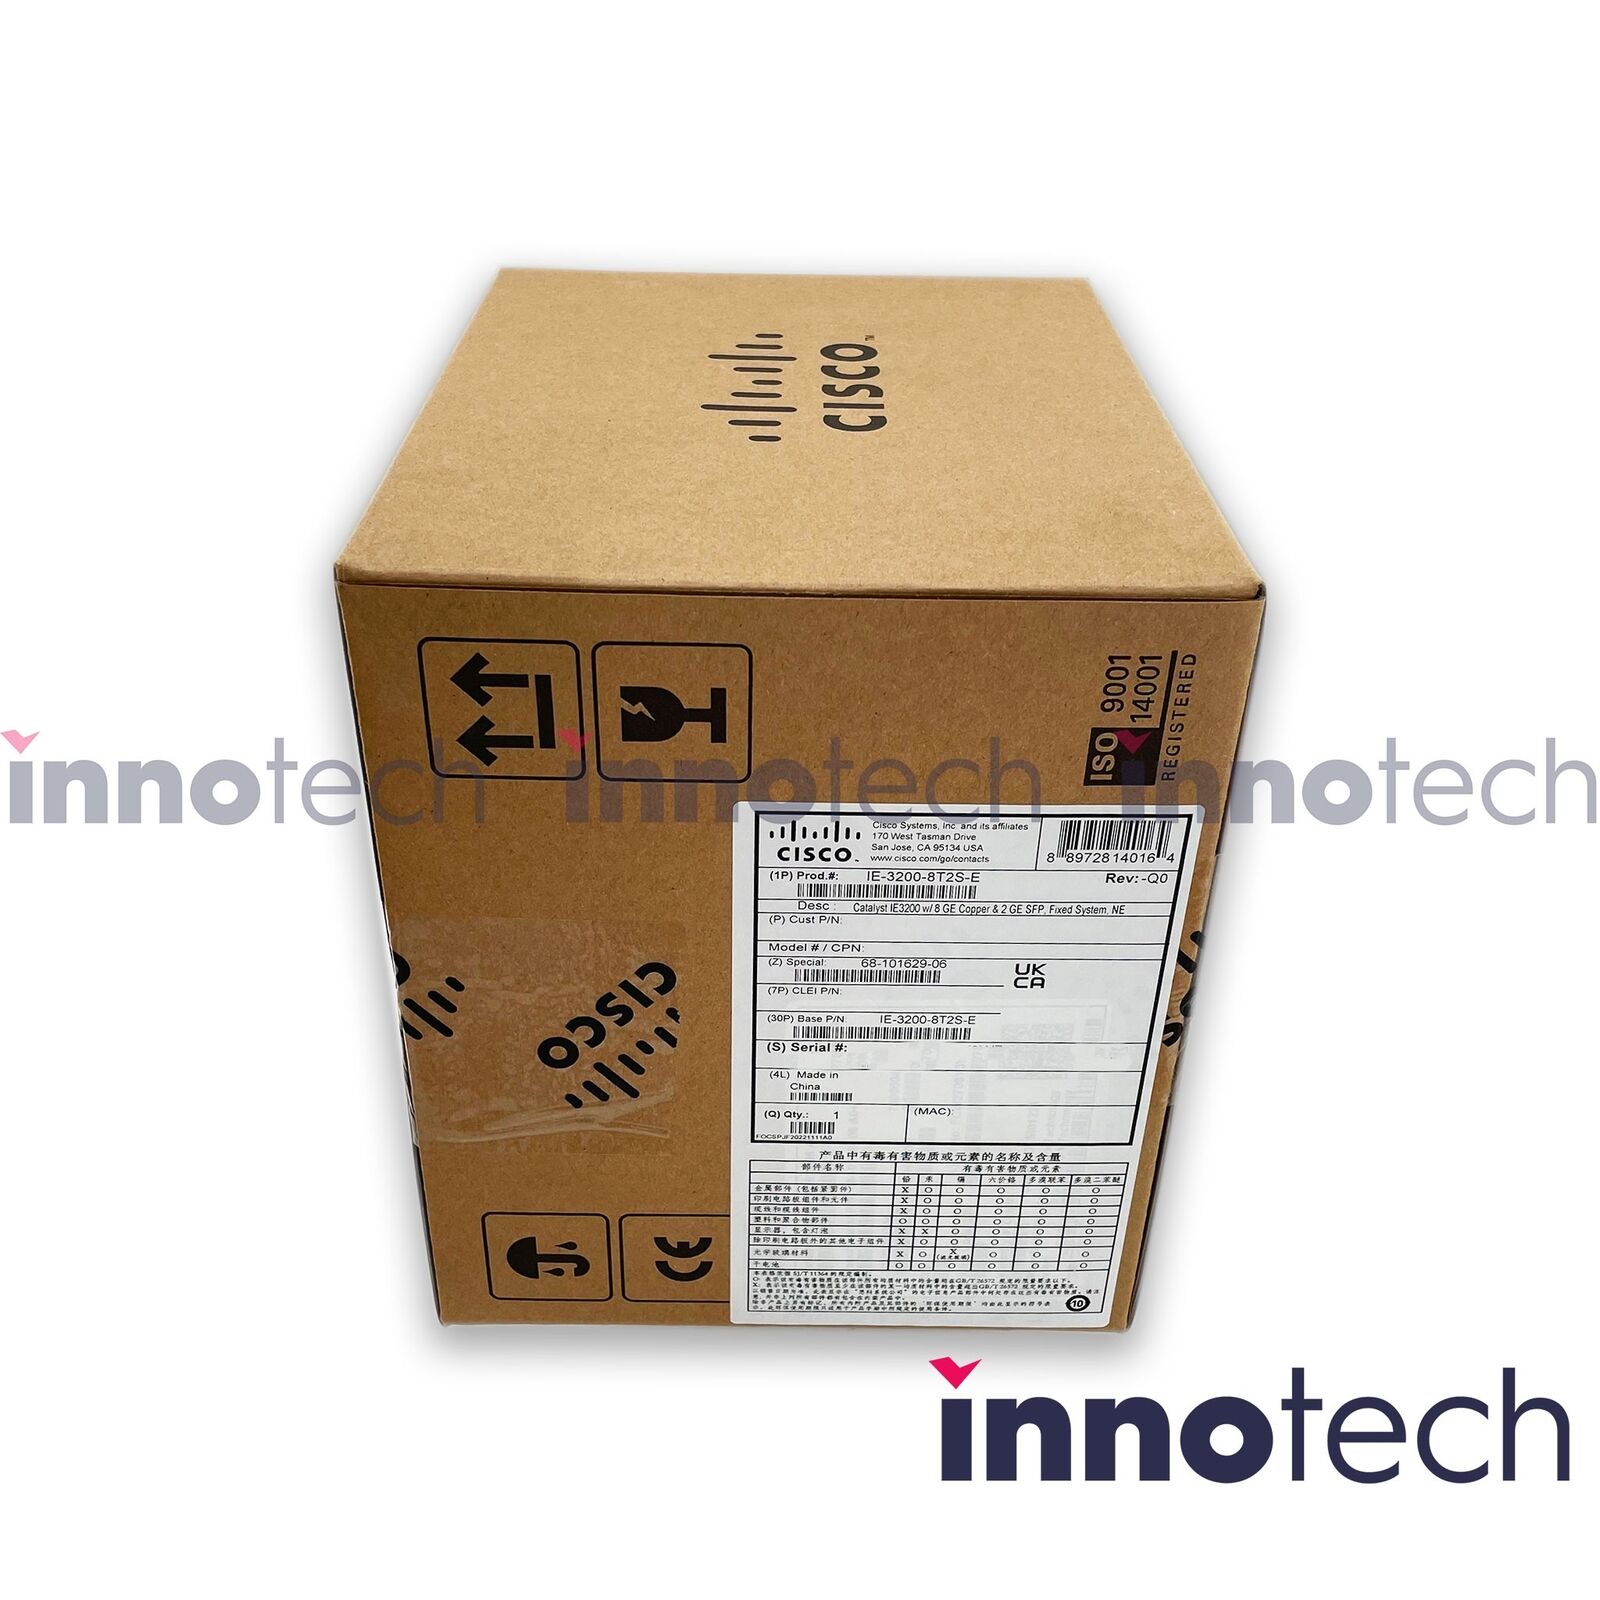 Cisco IE-3200-8T2S-E Catalyst IE-3200-8T2S Rugged Switch New Sealed